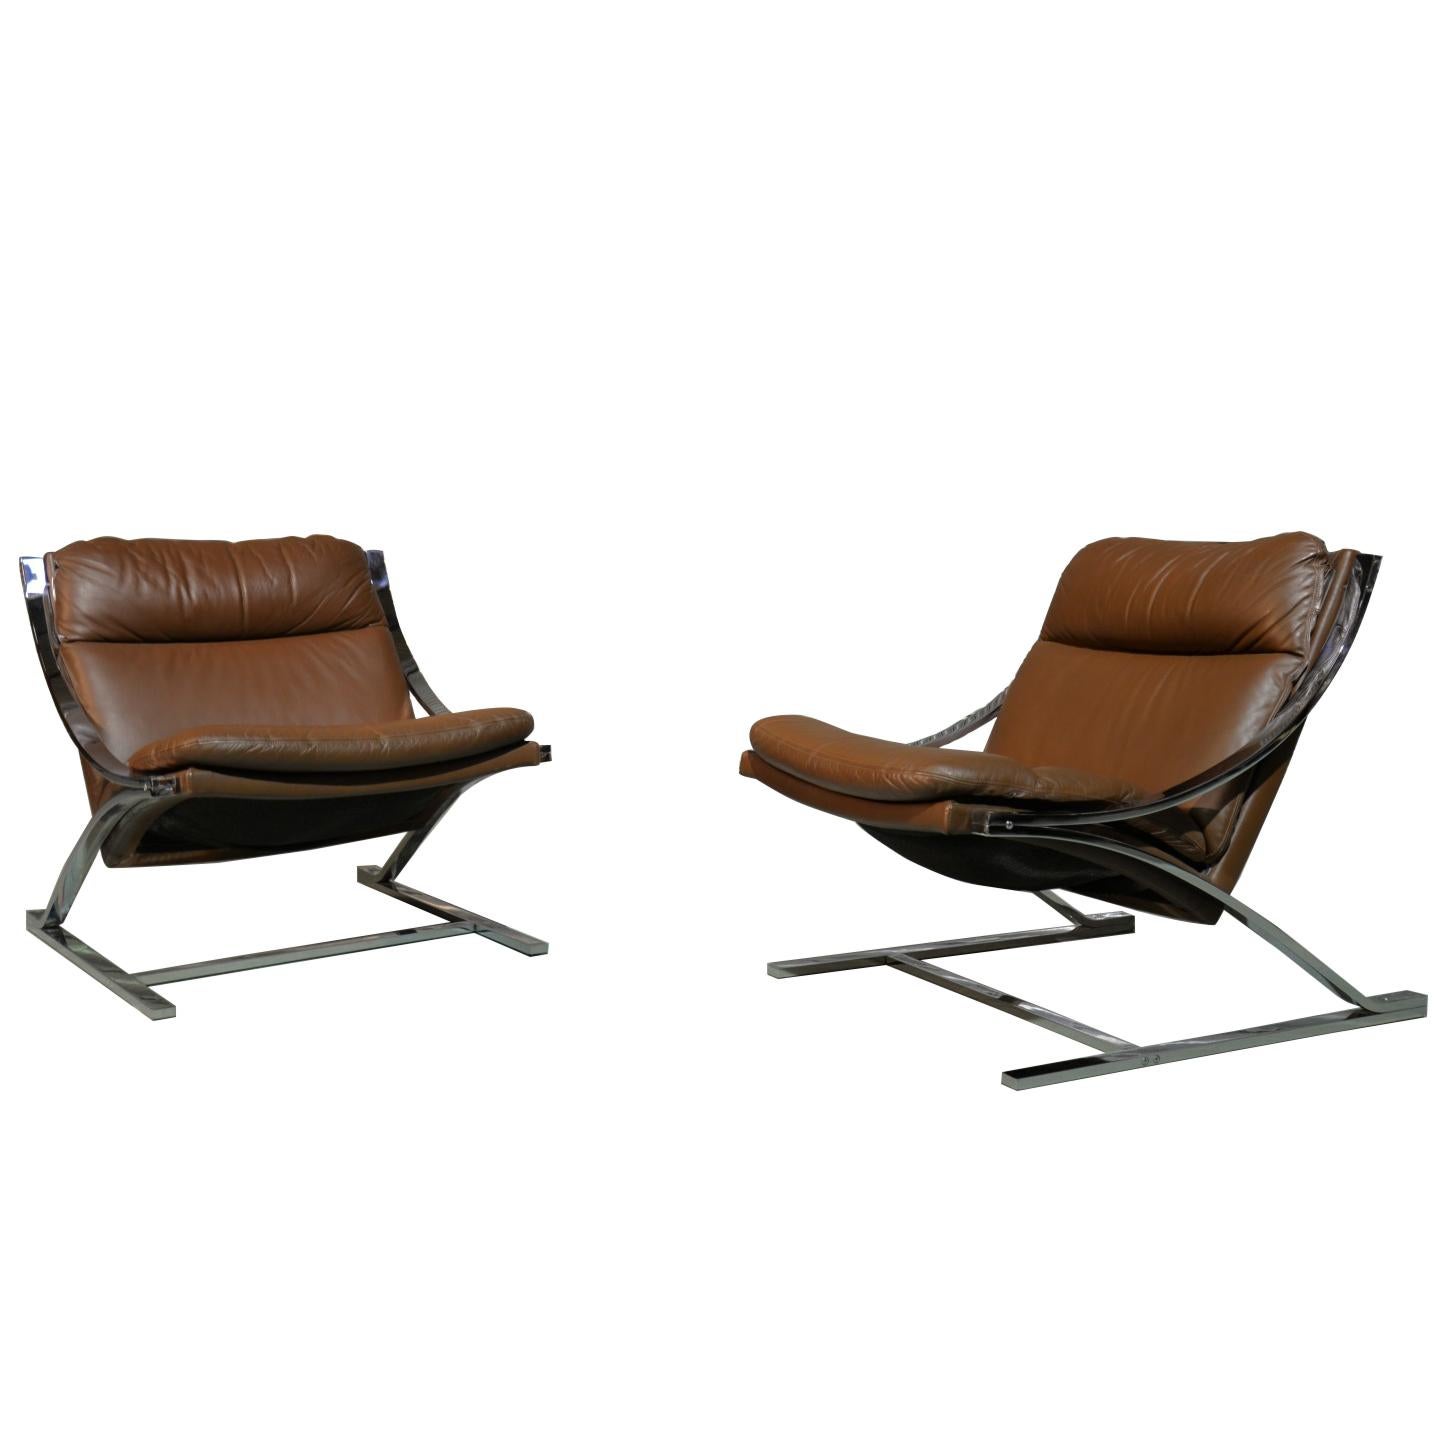 Paul Tuttle "Zeta" lounge chairs for Strassle of Switzerland, 1968 For Sale